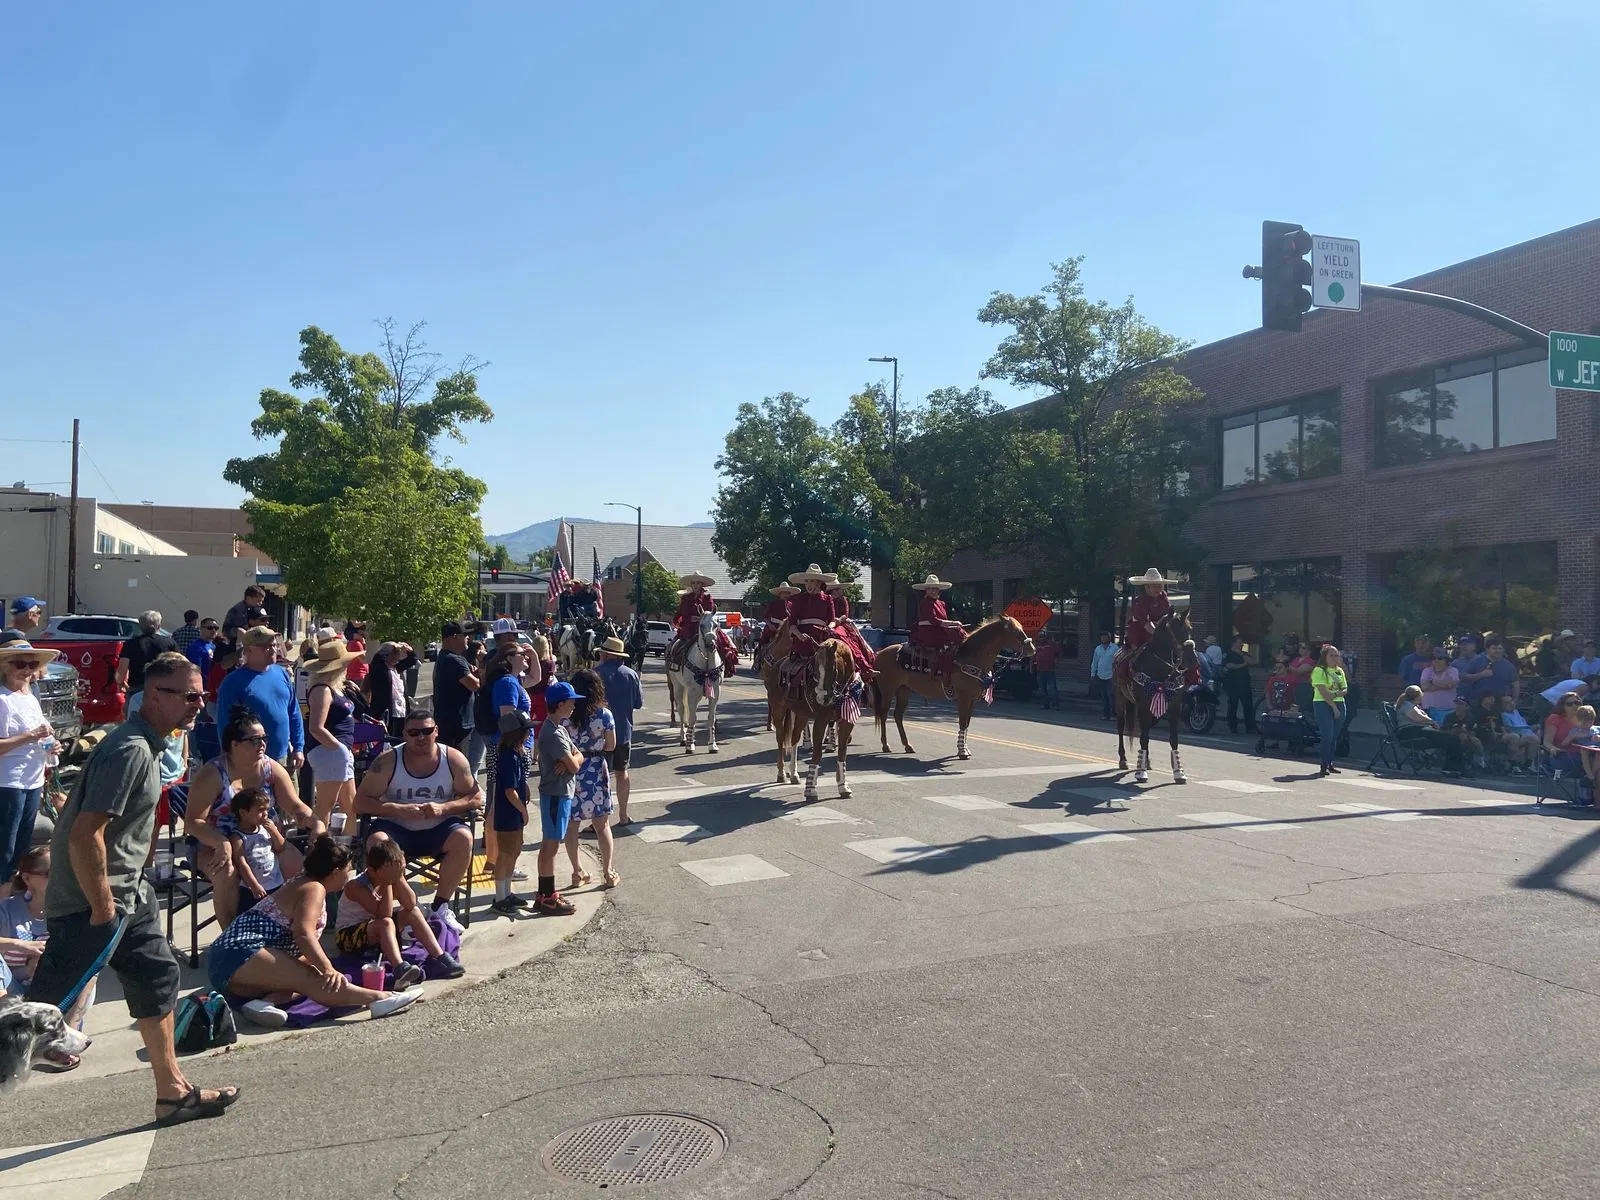 Caballeros riding horses in the Boise 4th of July parade.